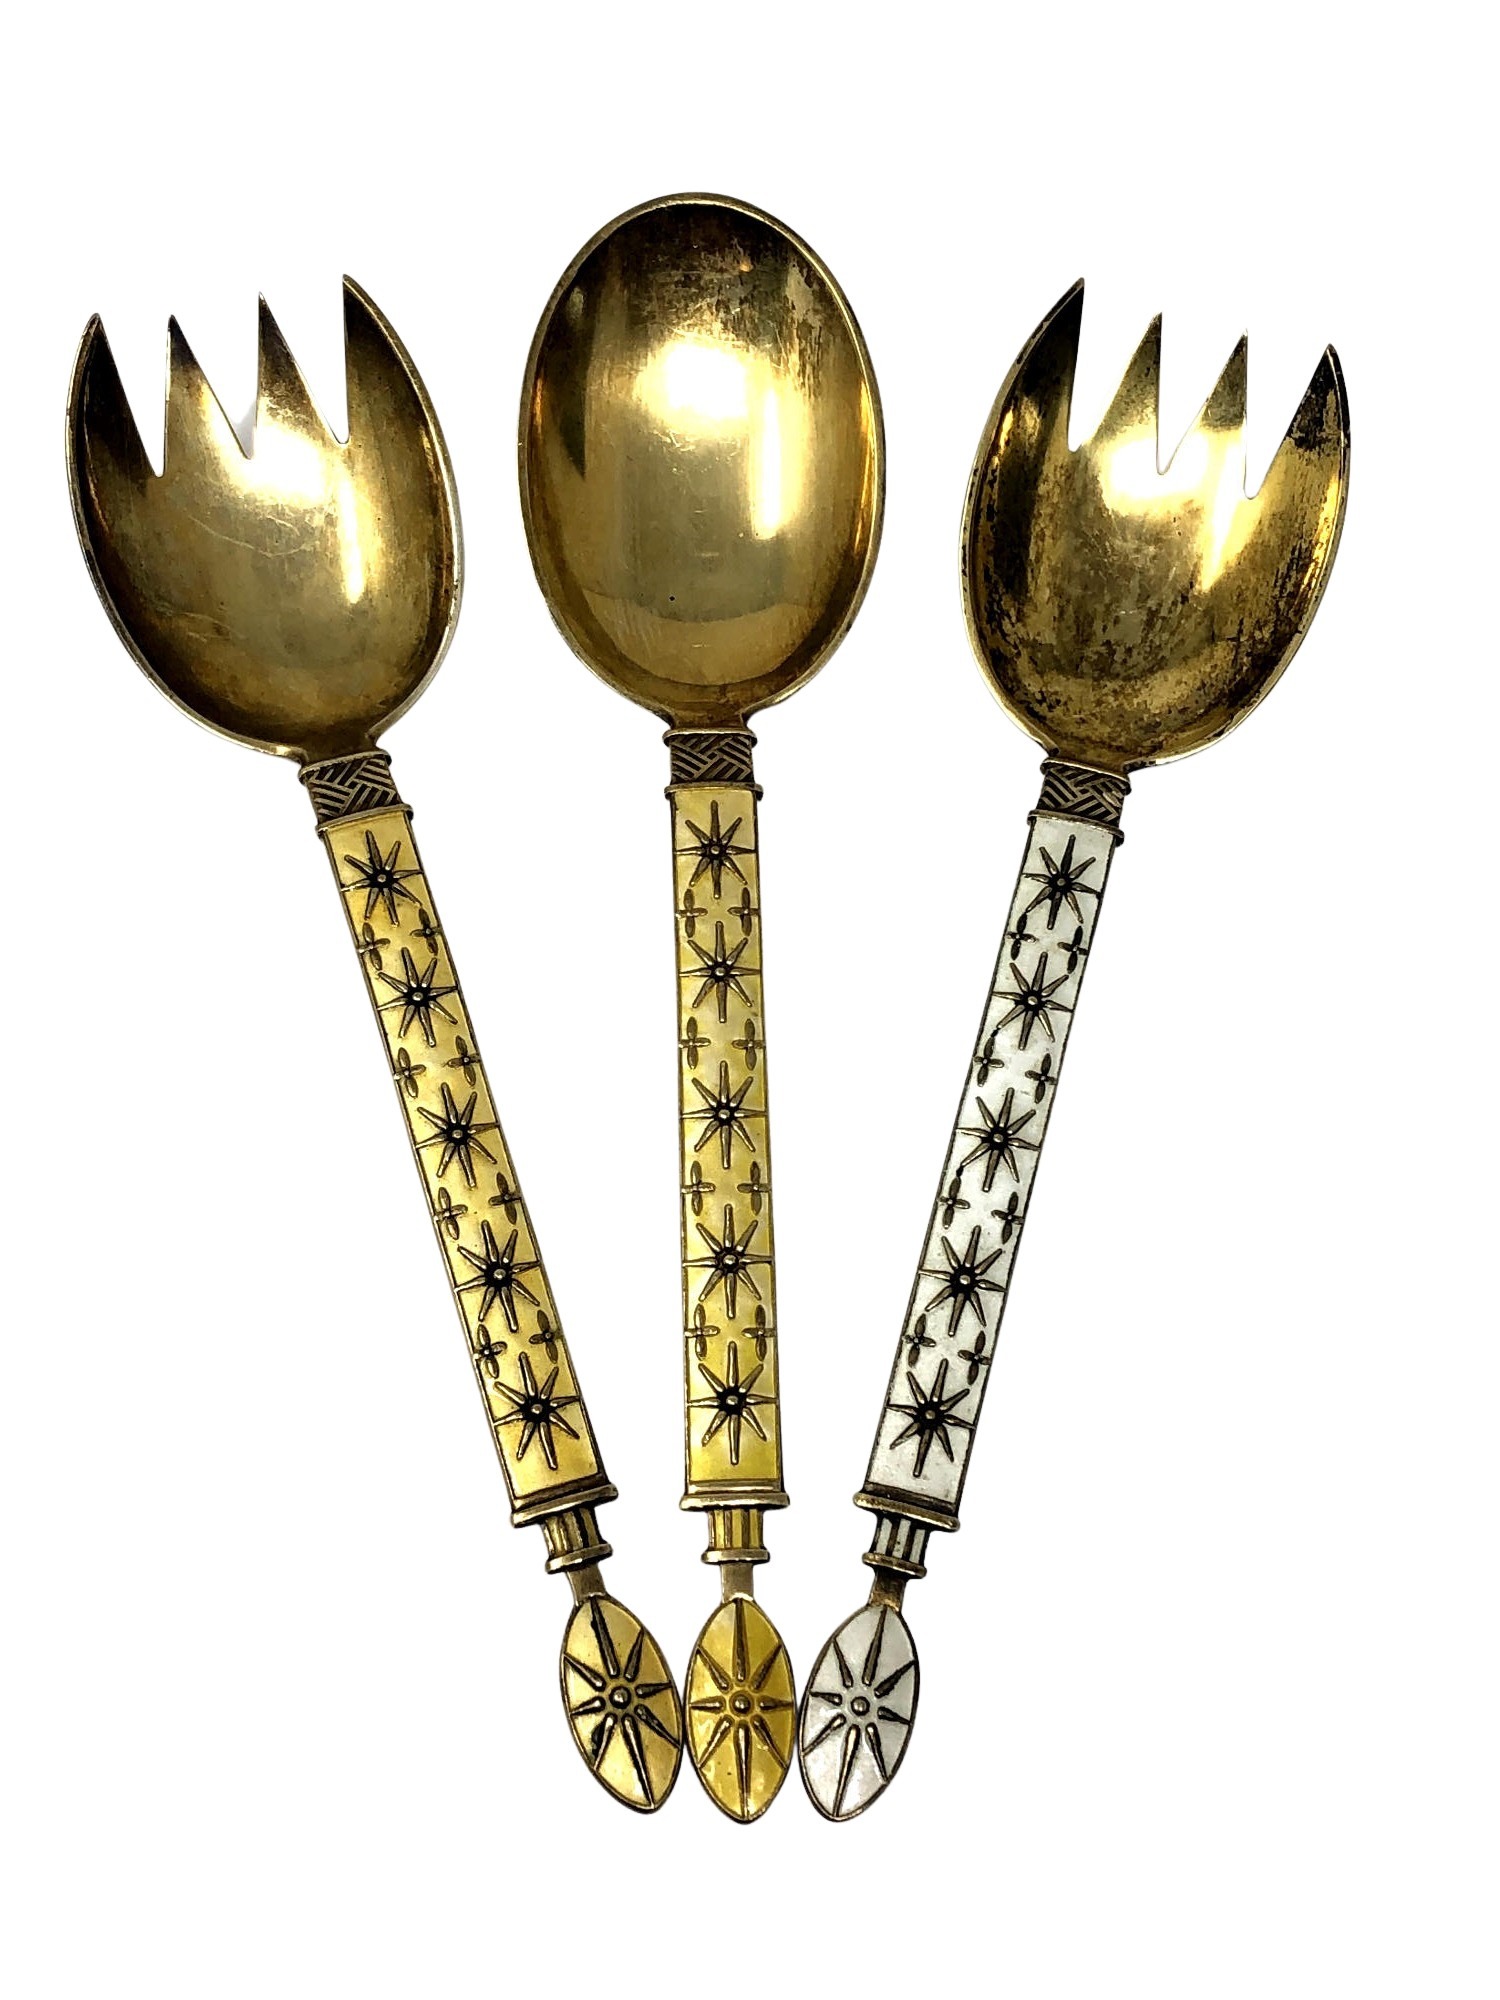 Three fine quality Norwegian silver gilt and enamel serving spoons by J.